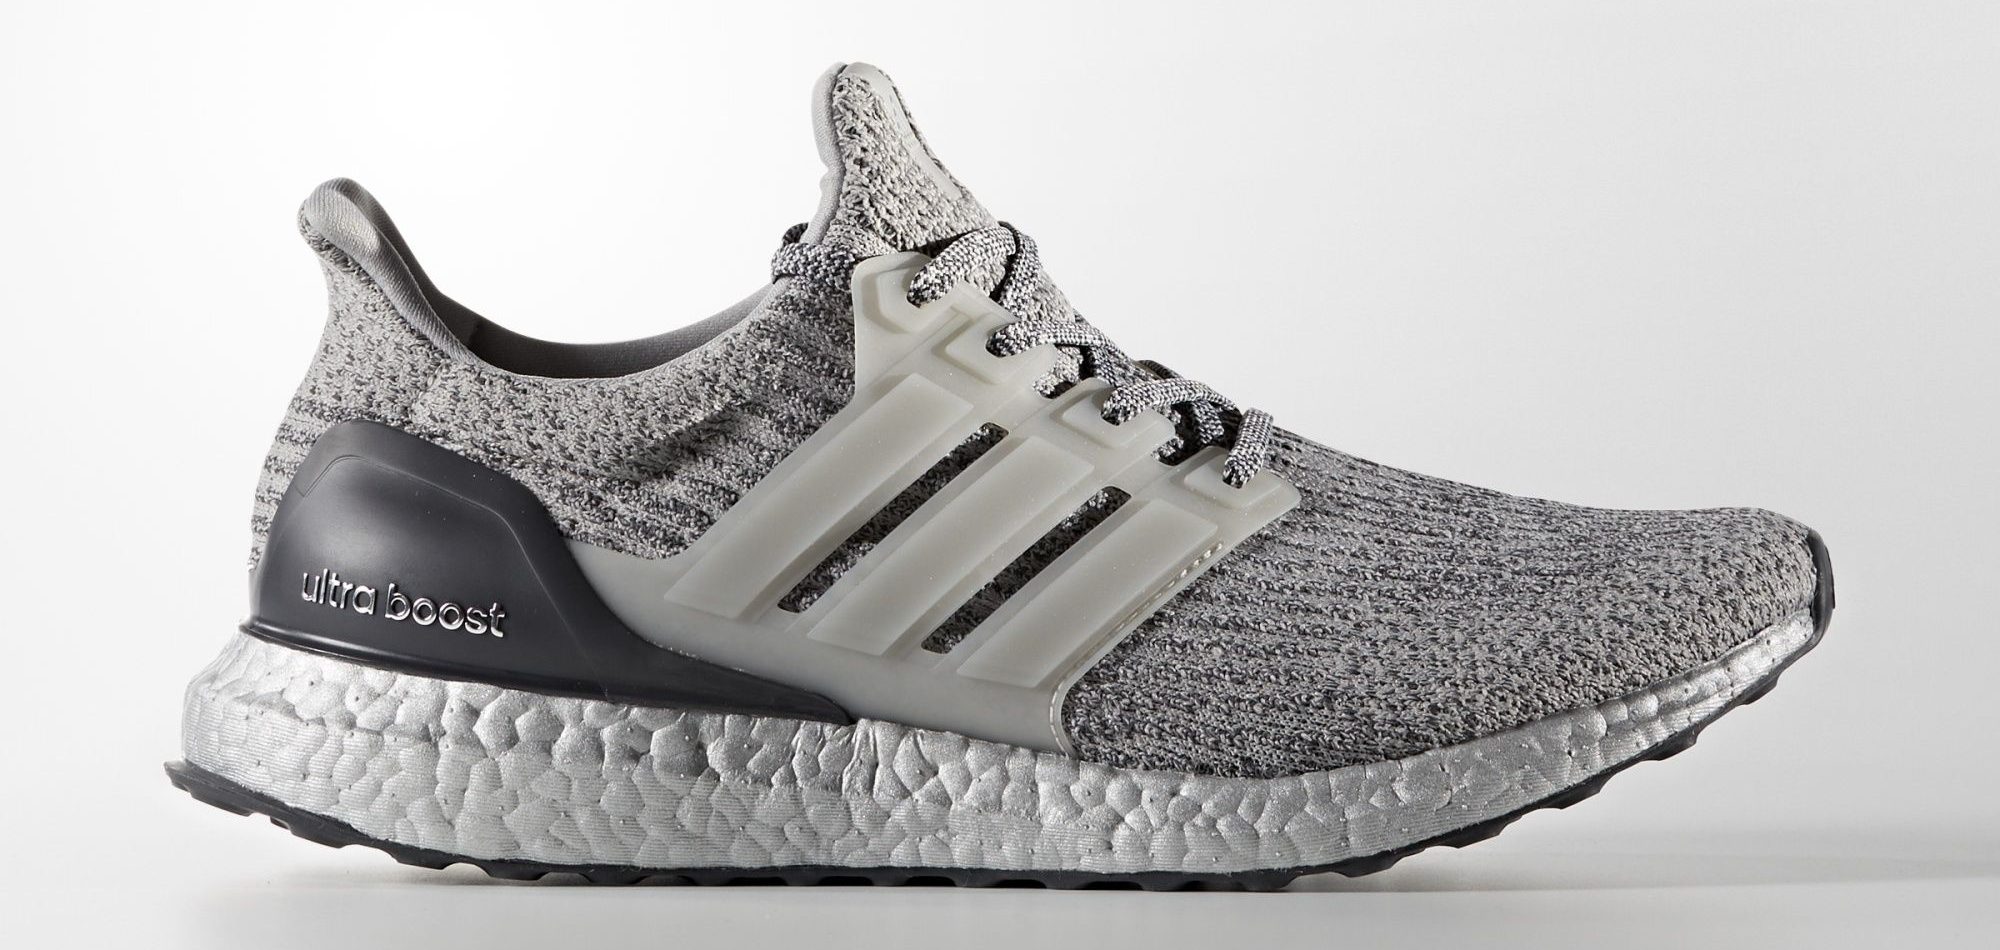 The adidas 'Silver Boost' Collection is 